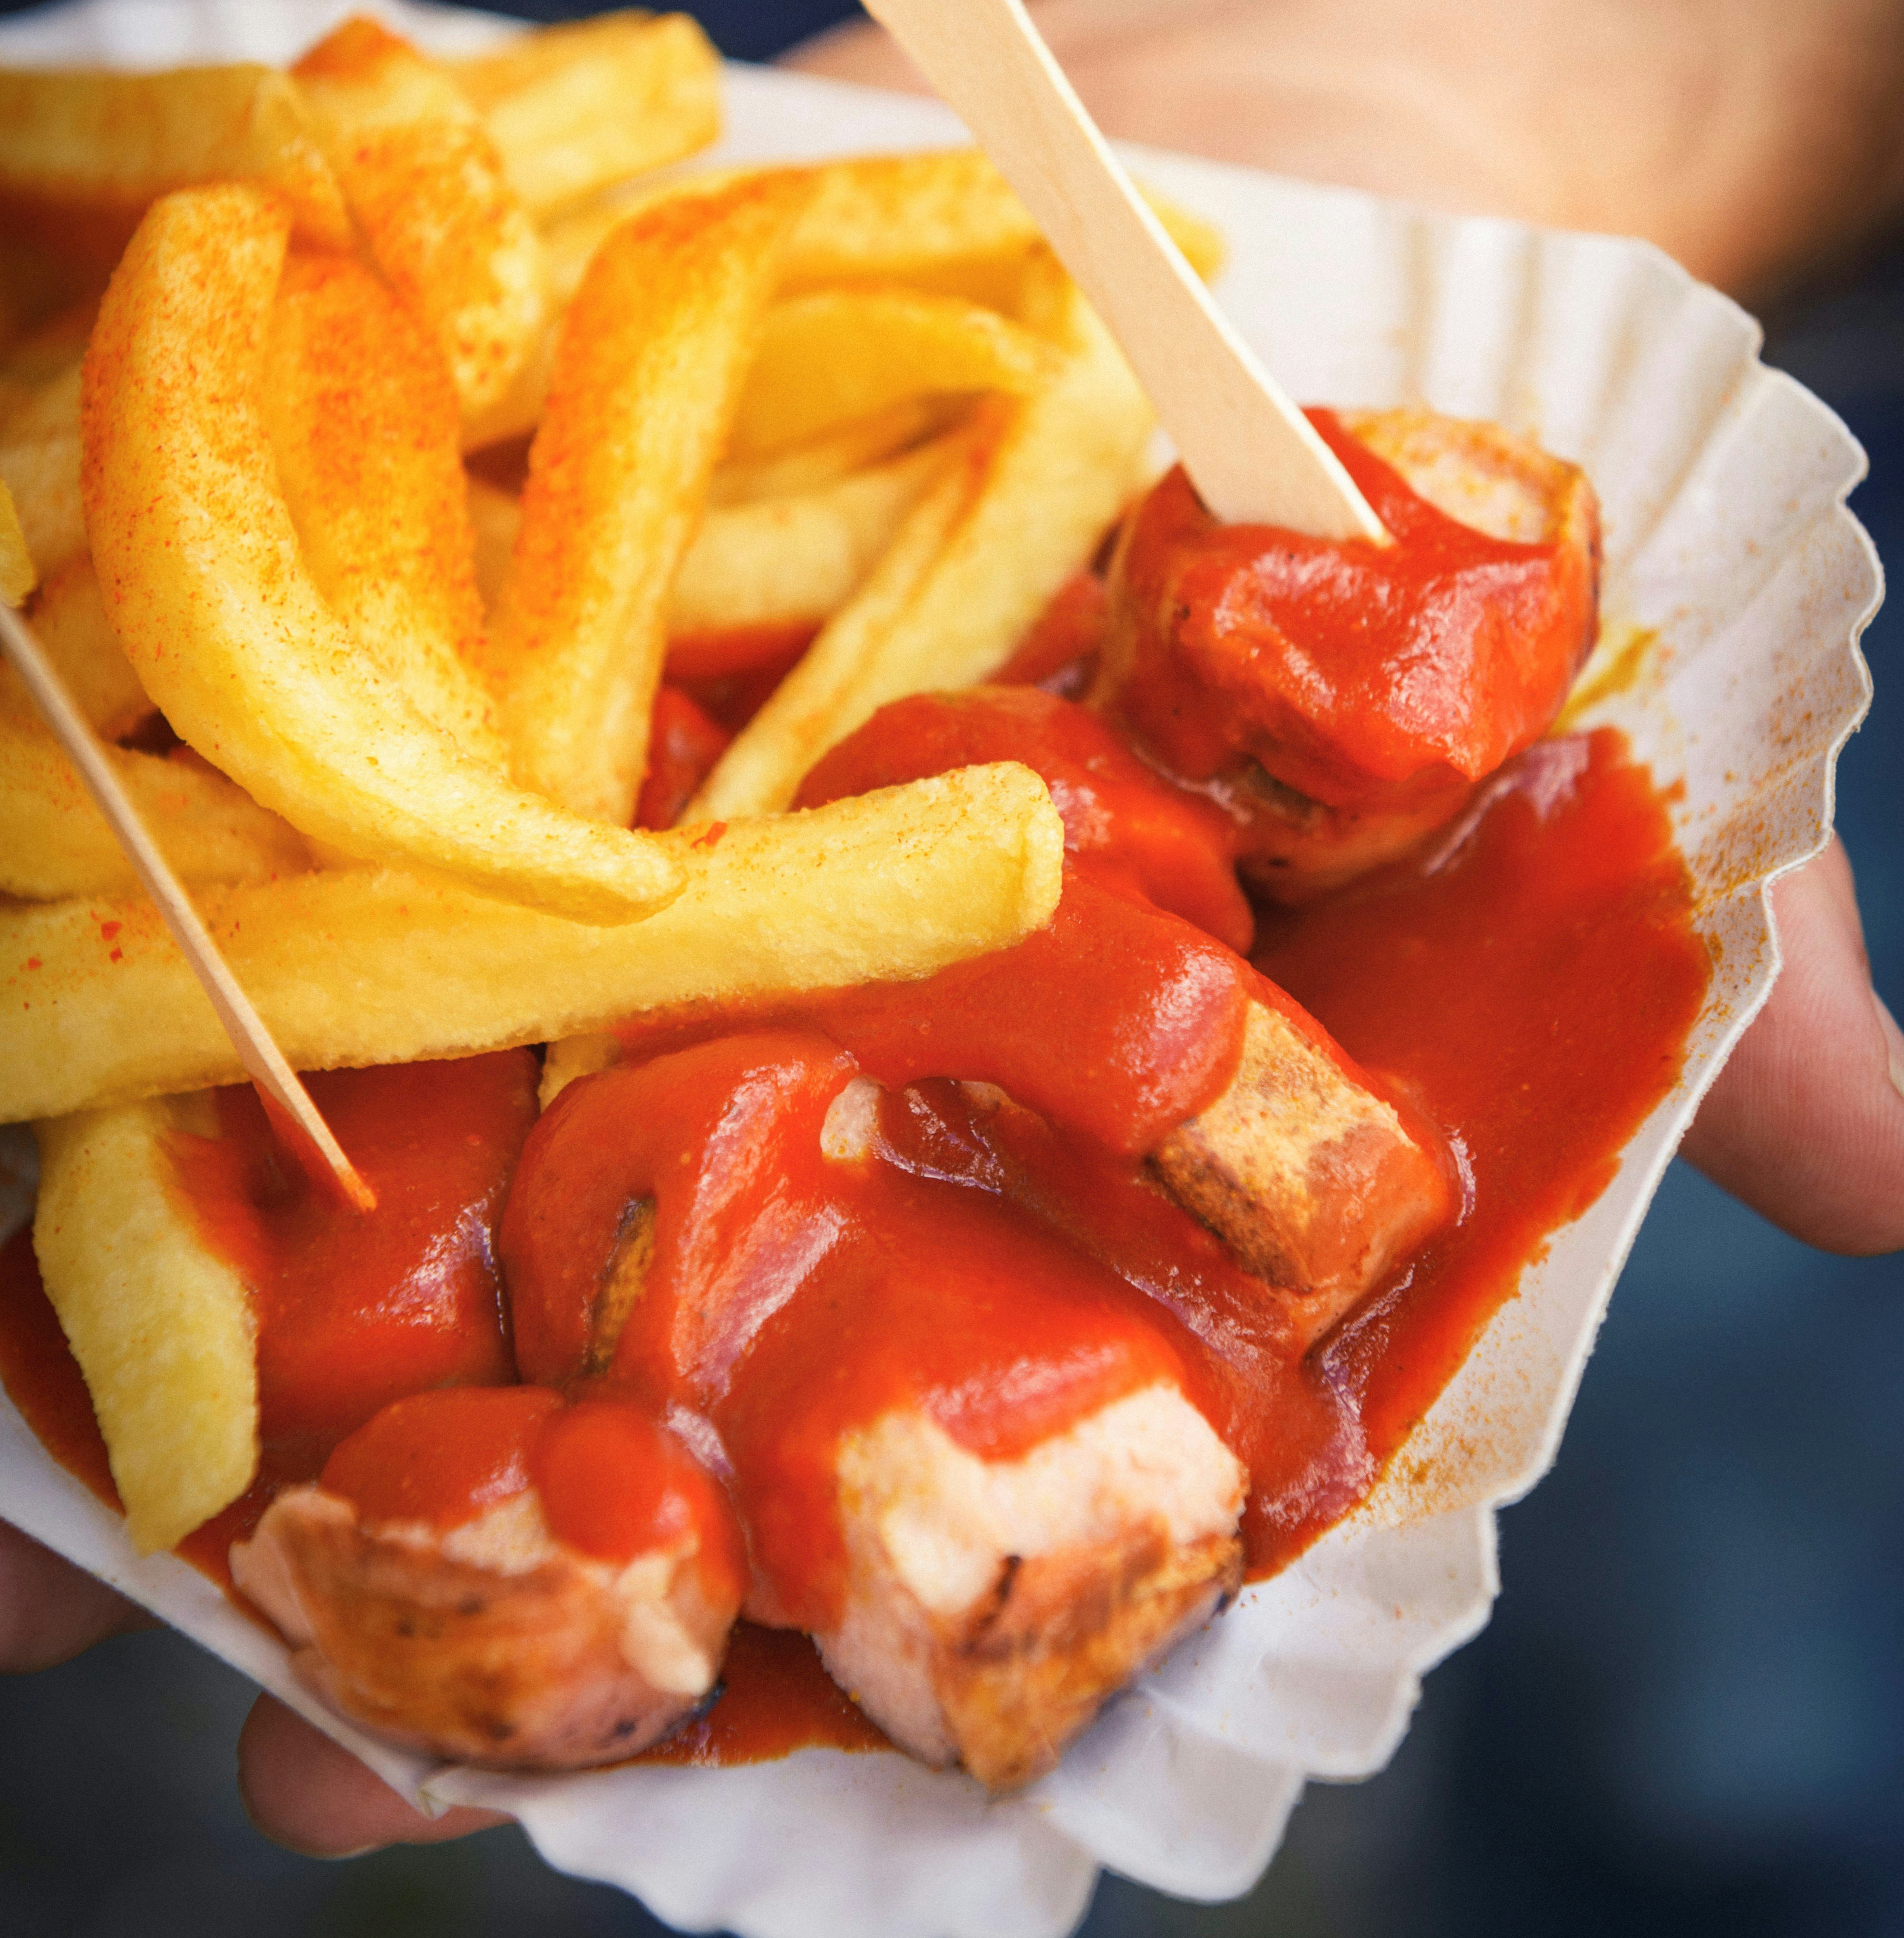 A hand holds out a portion of currywurst, purchased on a night out in Berlin. The food, cut up sausage and chips, is slathered in curry sauce.